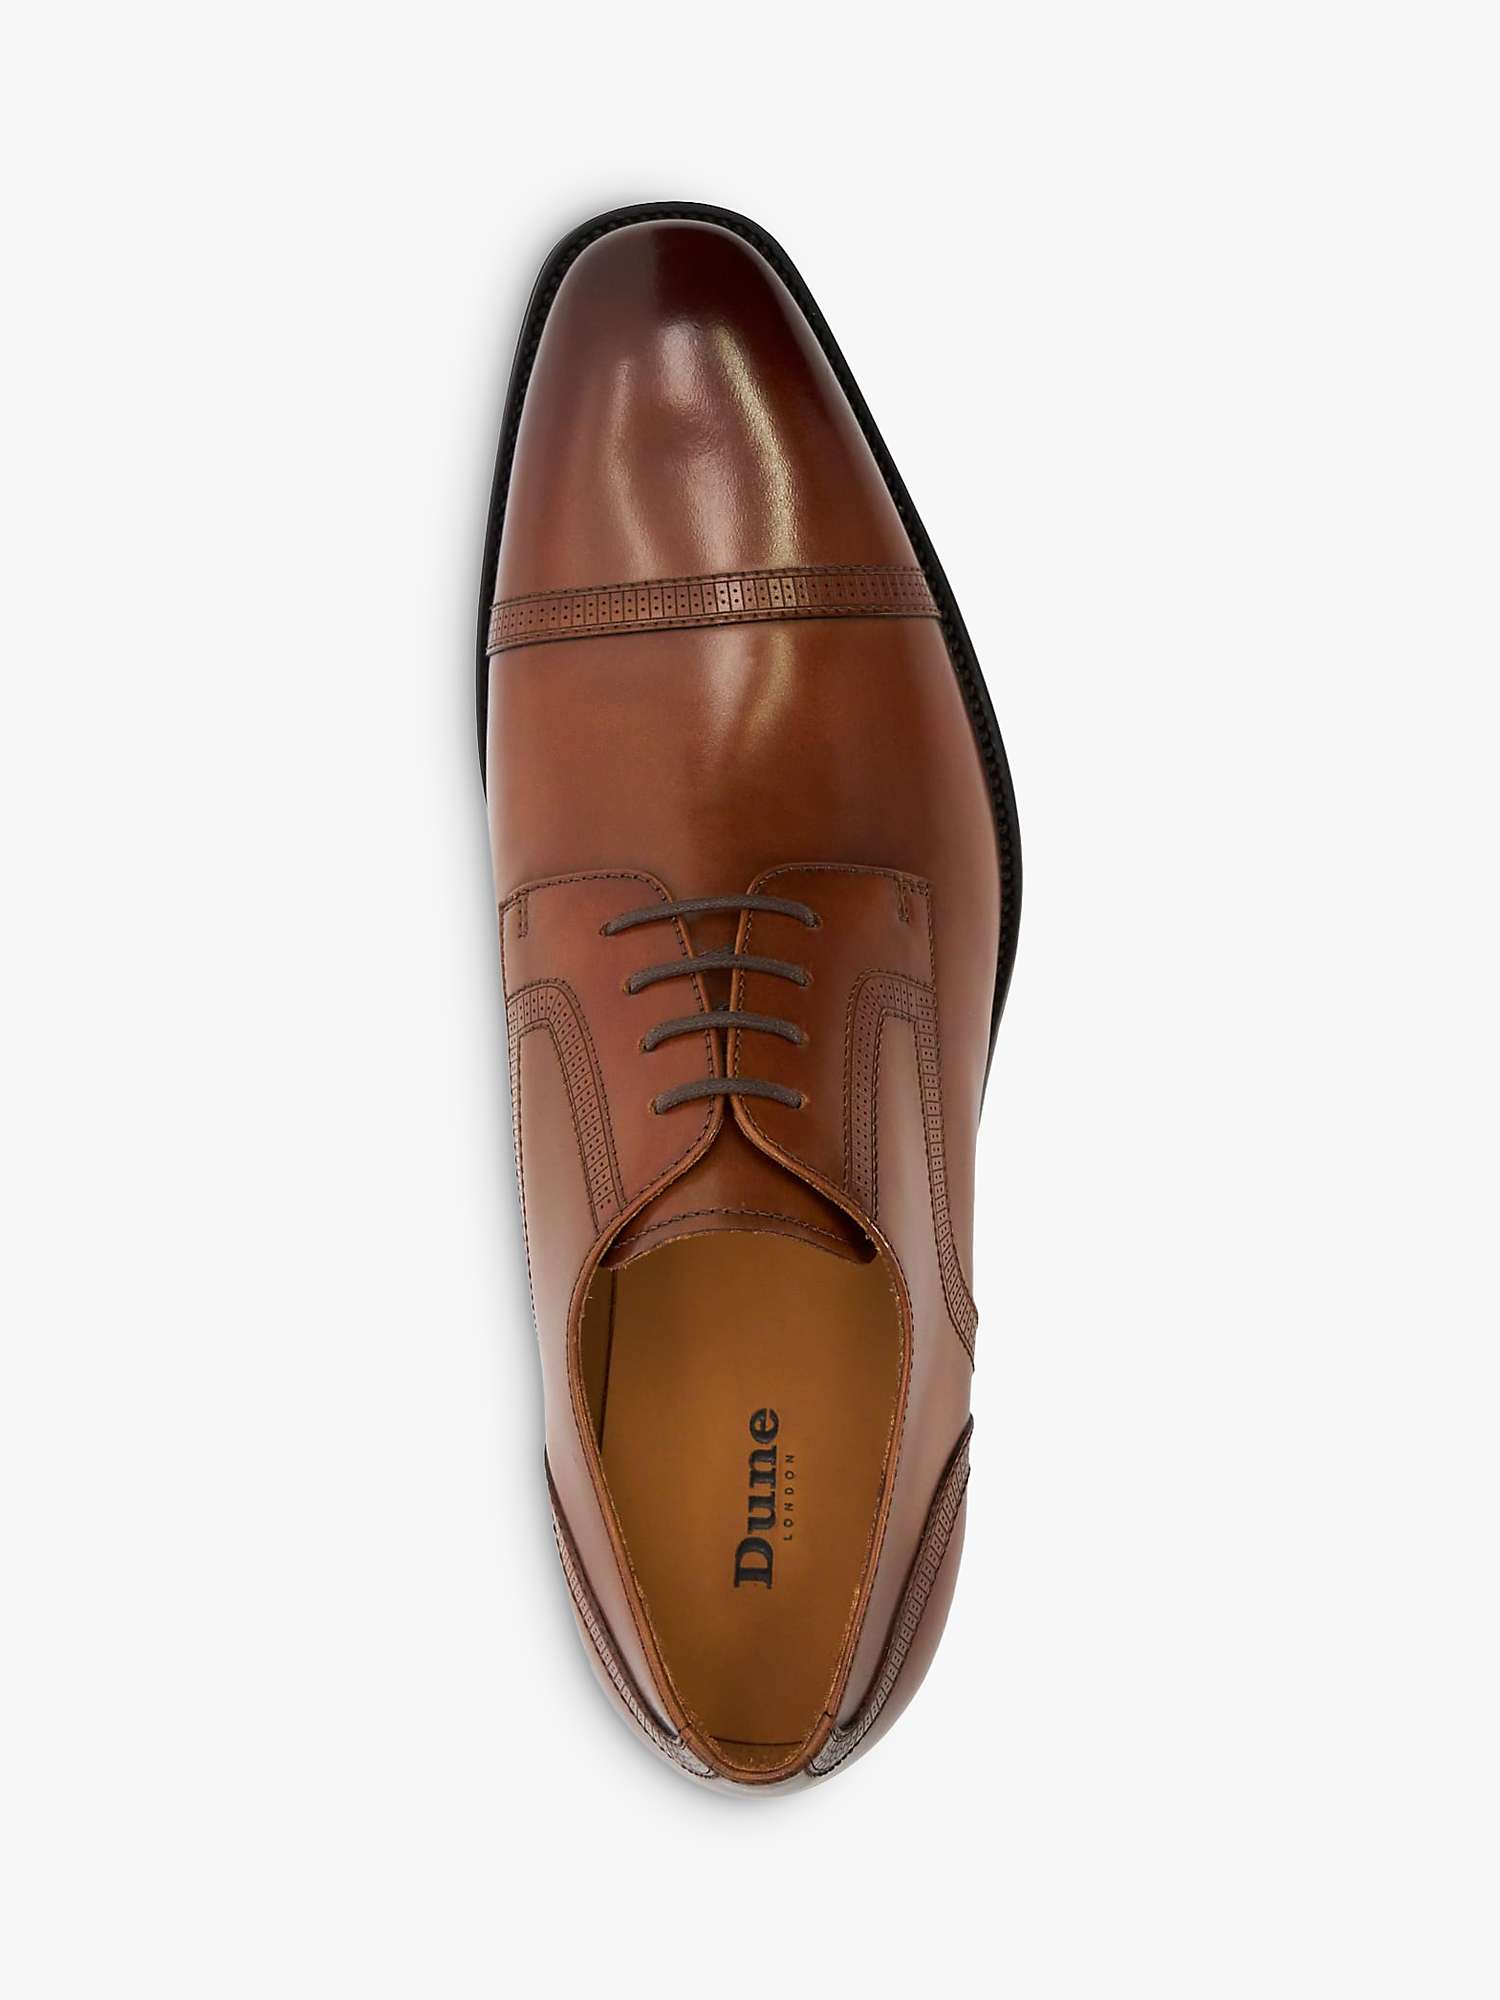 Buy Dune Salone Gibson Formal Shoes Online at johnlewis.com